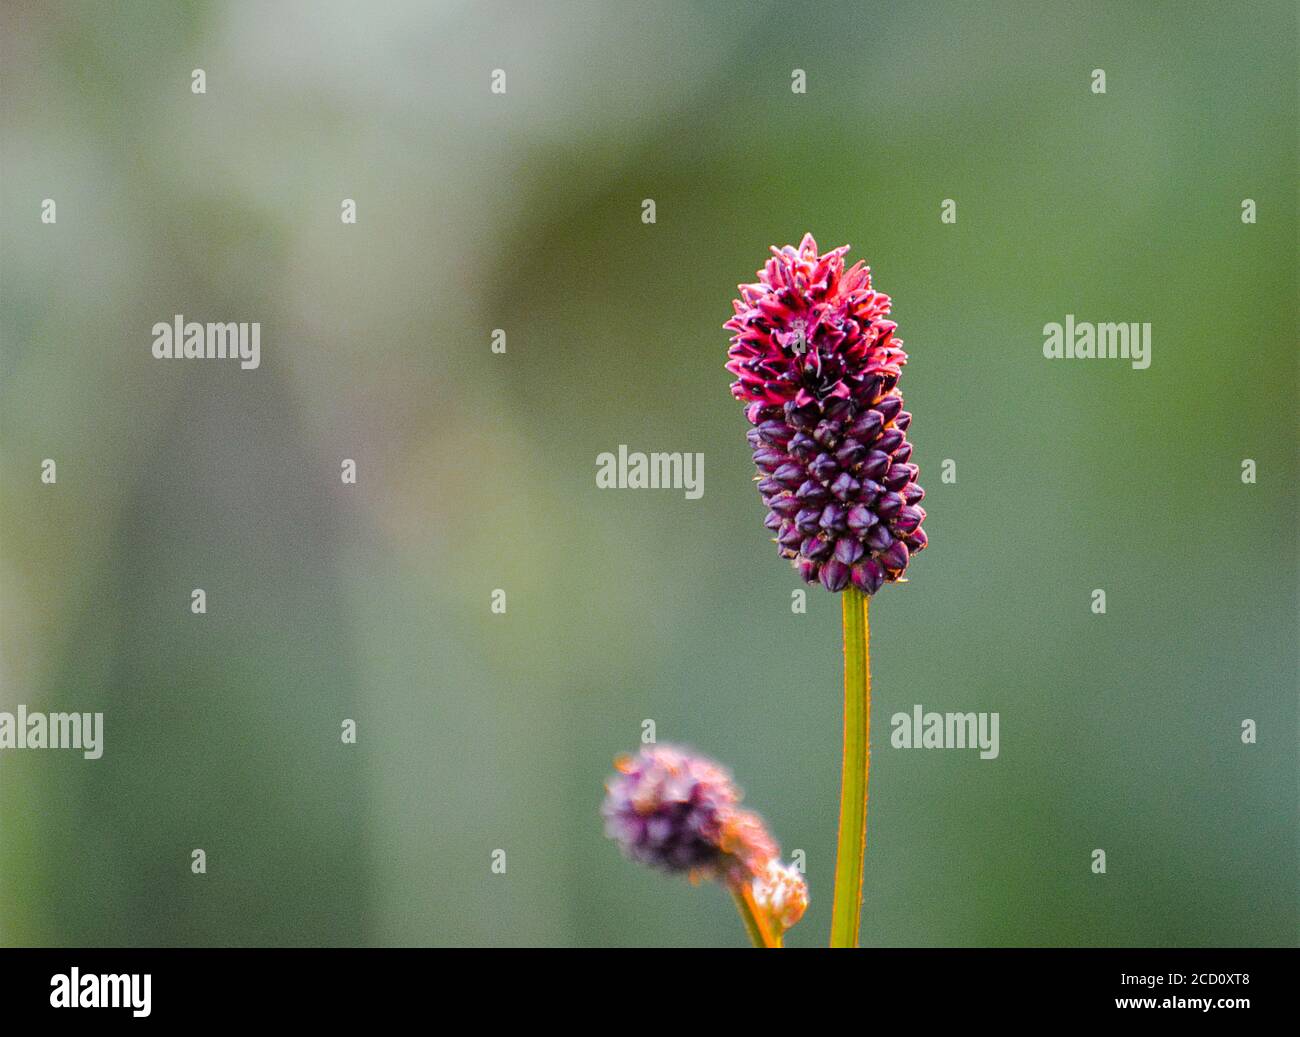 Great Burnet - Sanguisorba officinalis. A flower in the foreground. Stock Photo